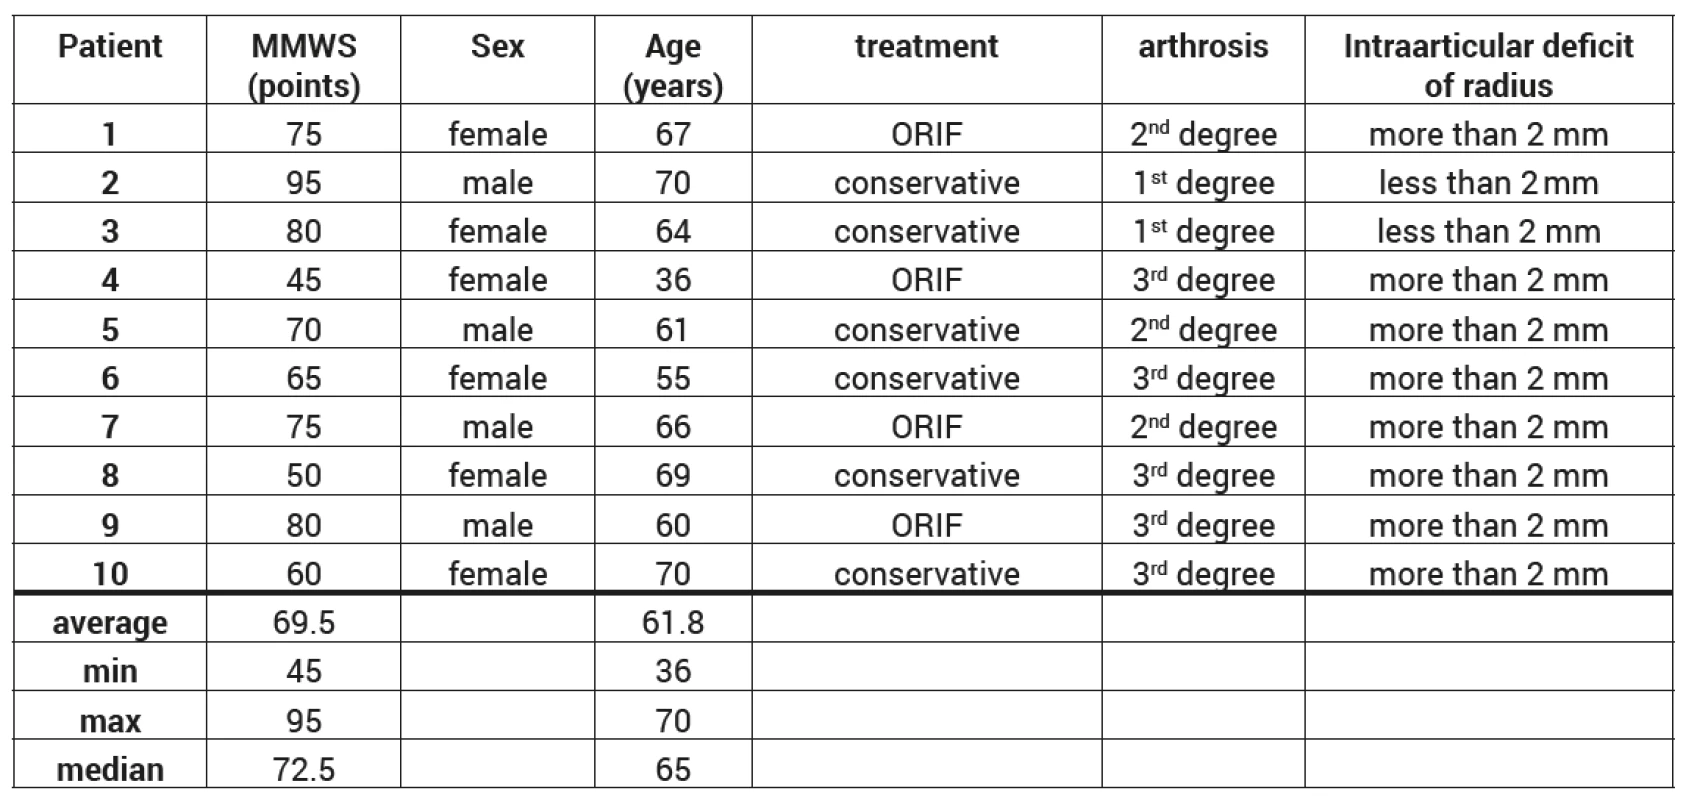  Patients with 1st–3rd degree radiocarpal arthrosis (ORIF - internal osteosynthesis)